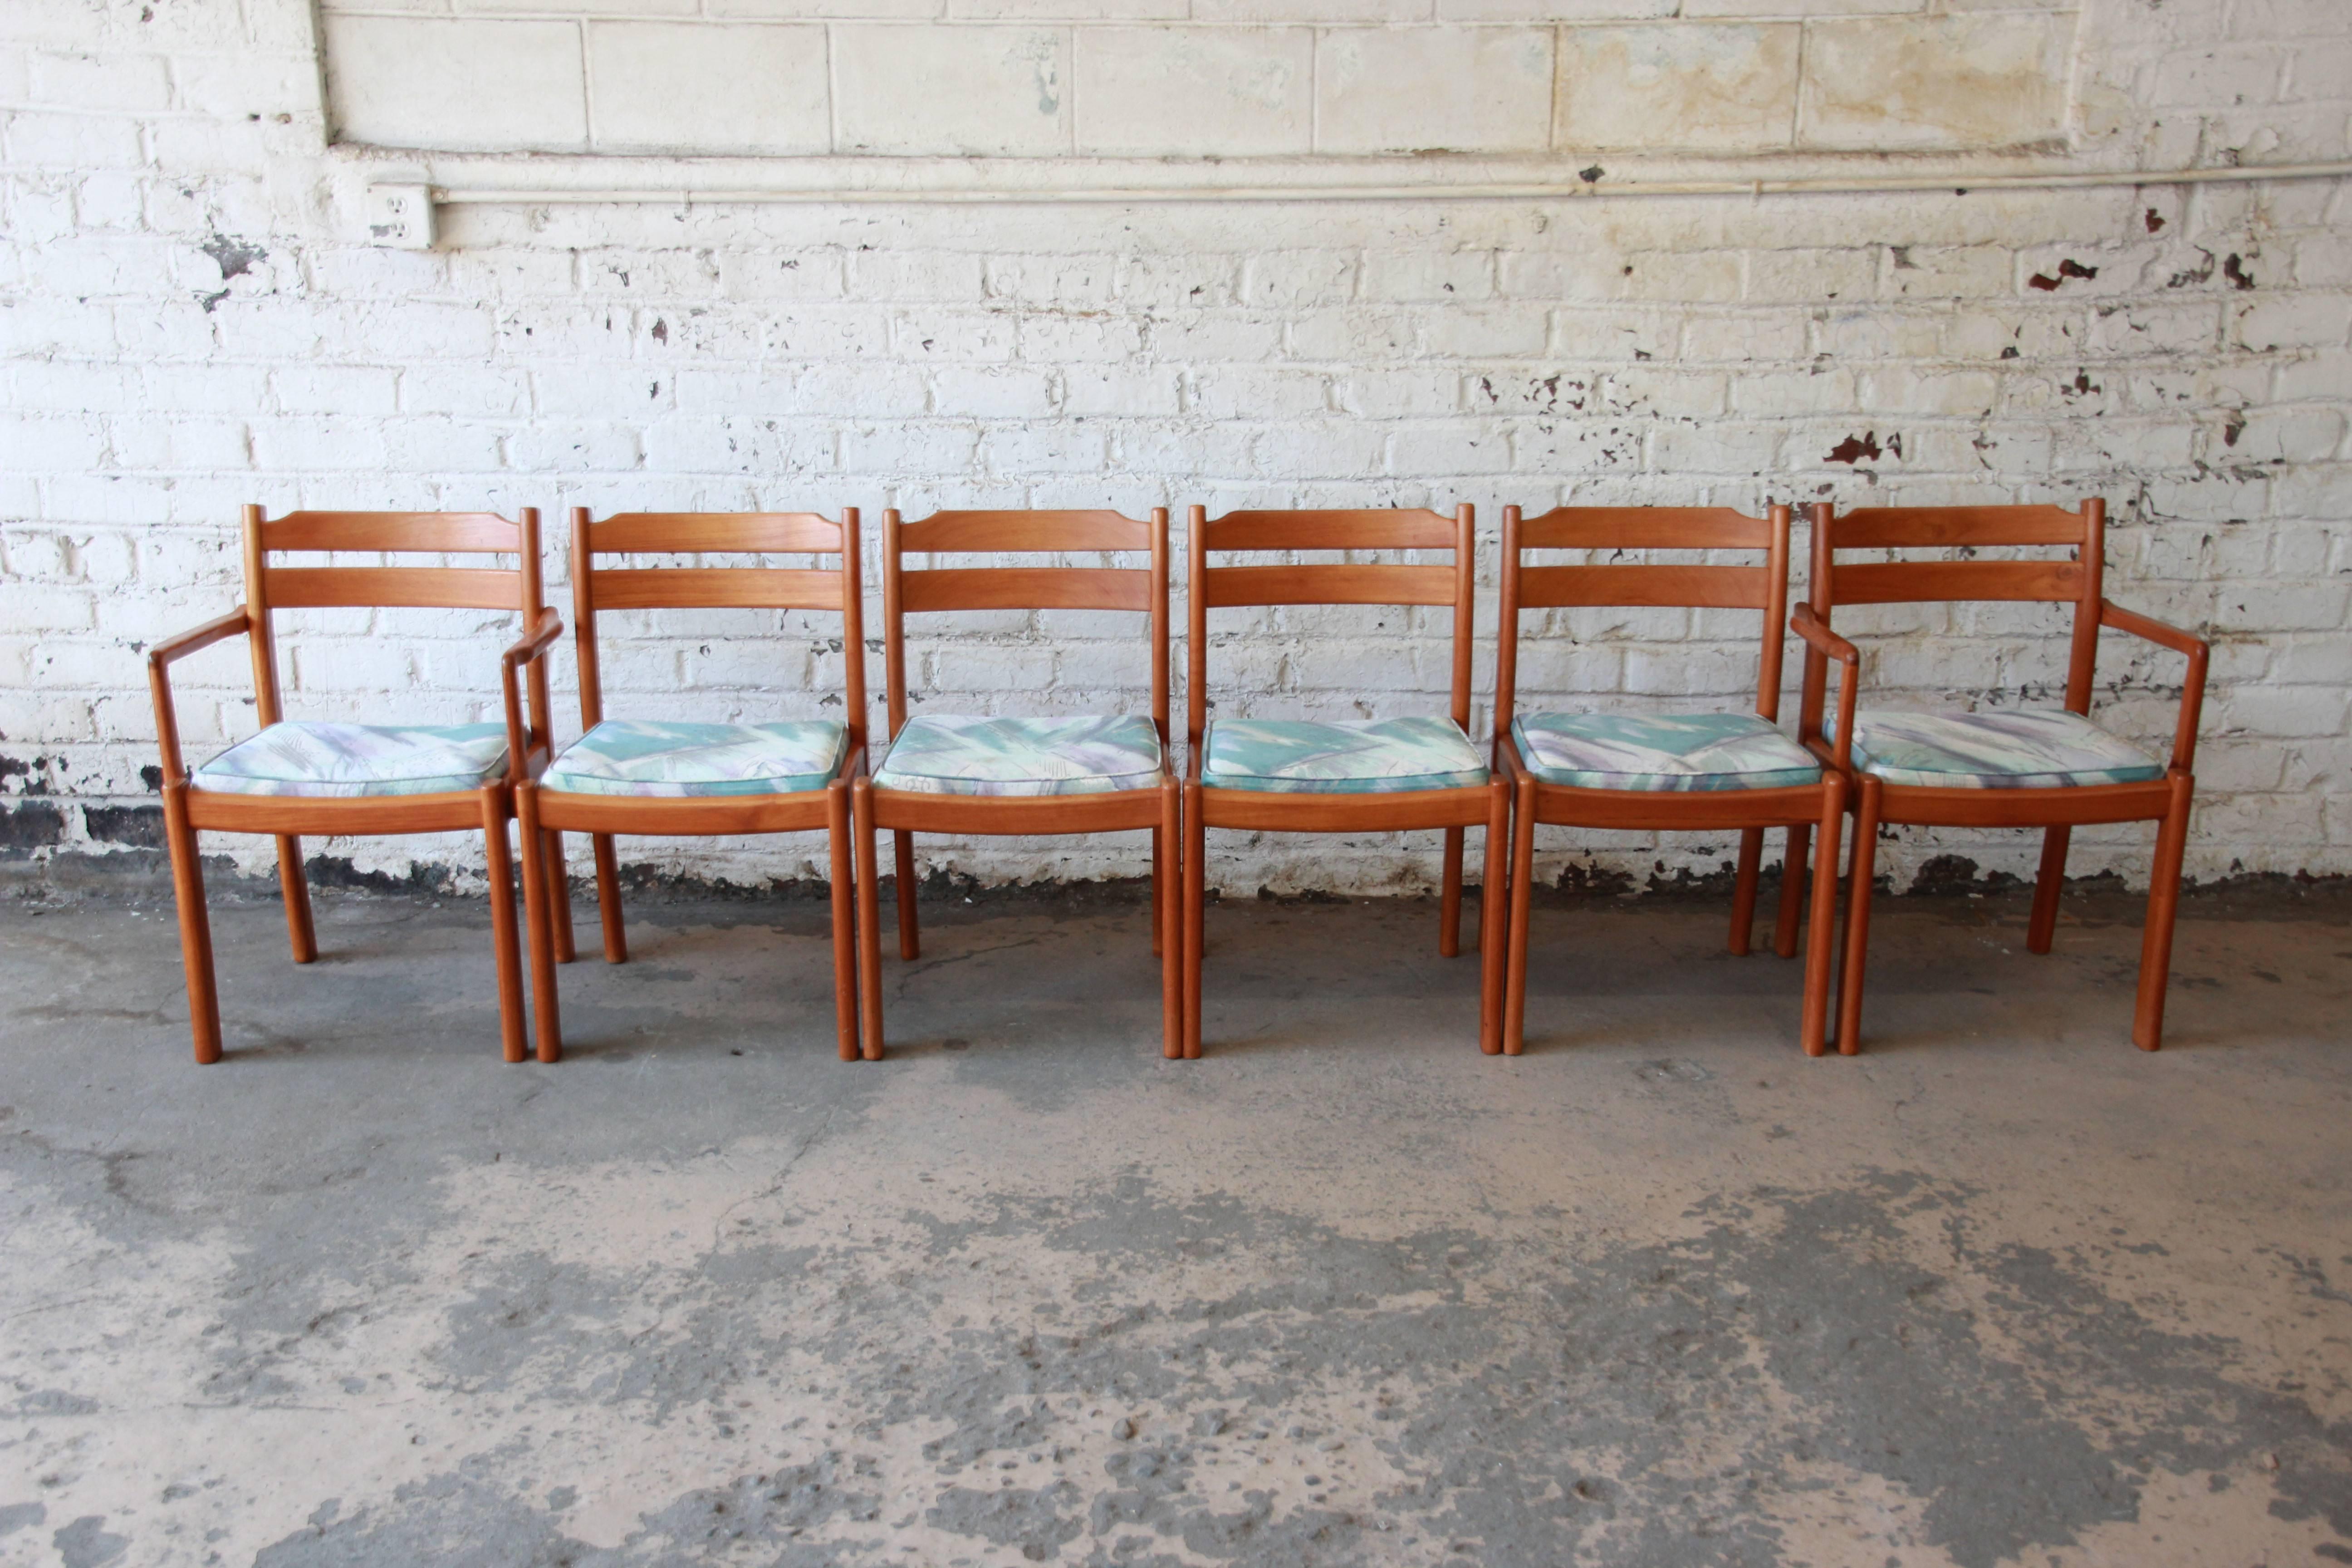 A nice set of six solid teak dining chairs made in Denmark by Dyrlund. The chairs feature solid sculpted teak construction and original vintage upholstery in white, teal, and purple. The set includes two captain chairs and four side chairs. The